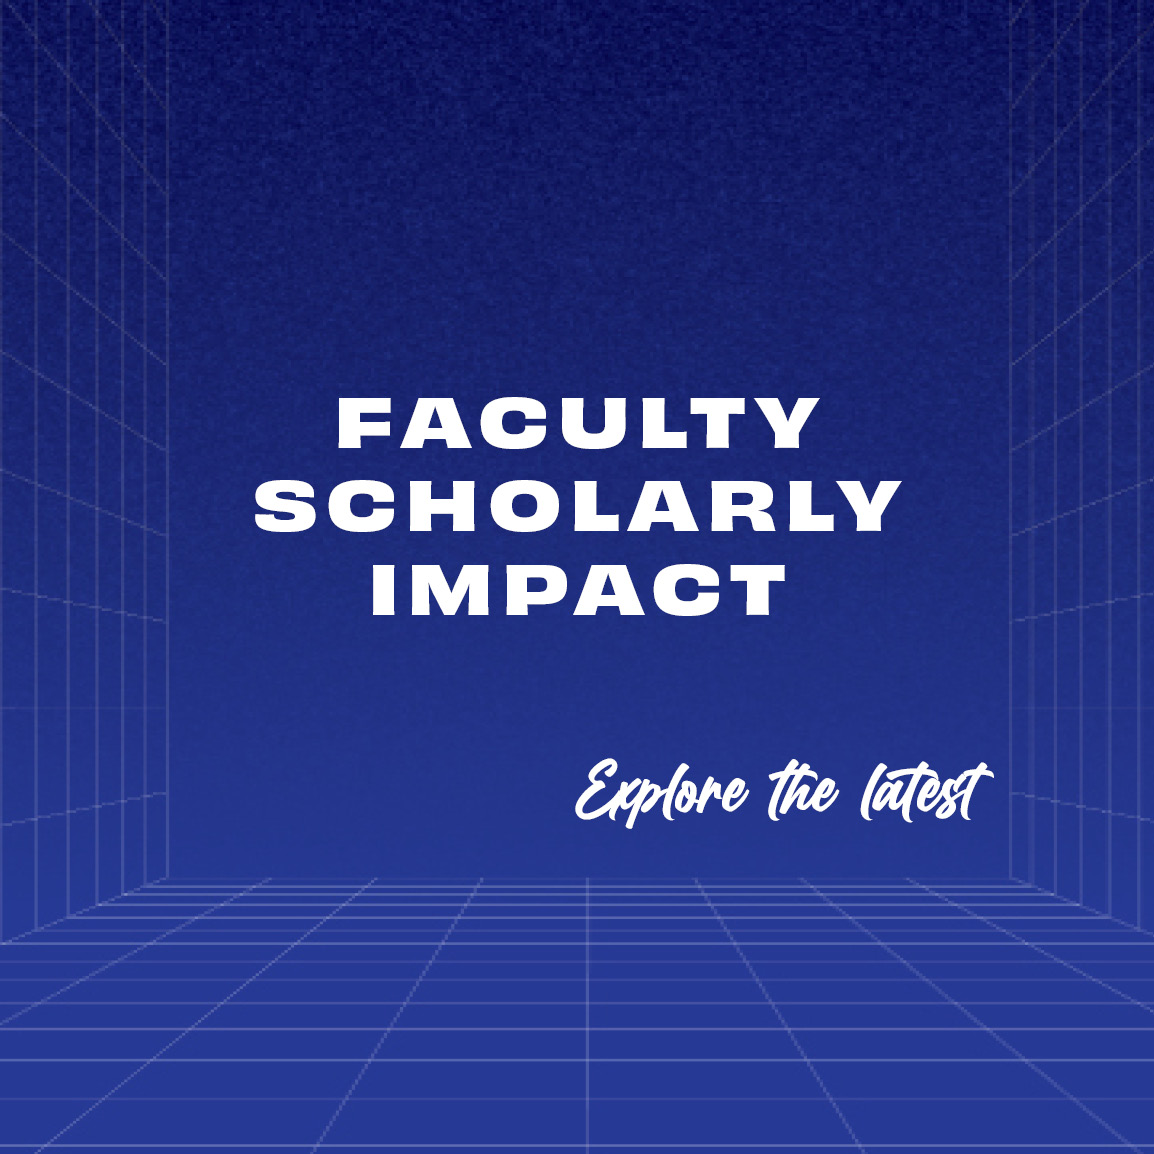 Faculty Scholarly Impact - Explore the latest